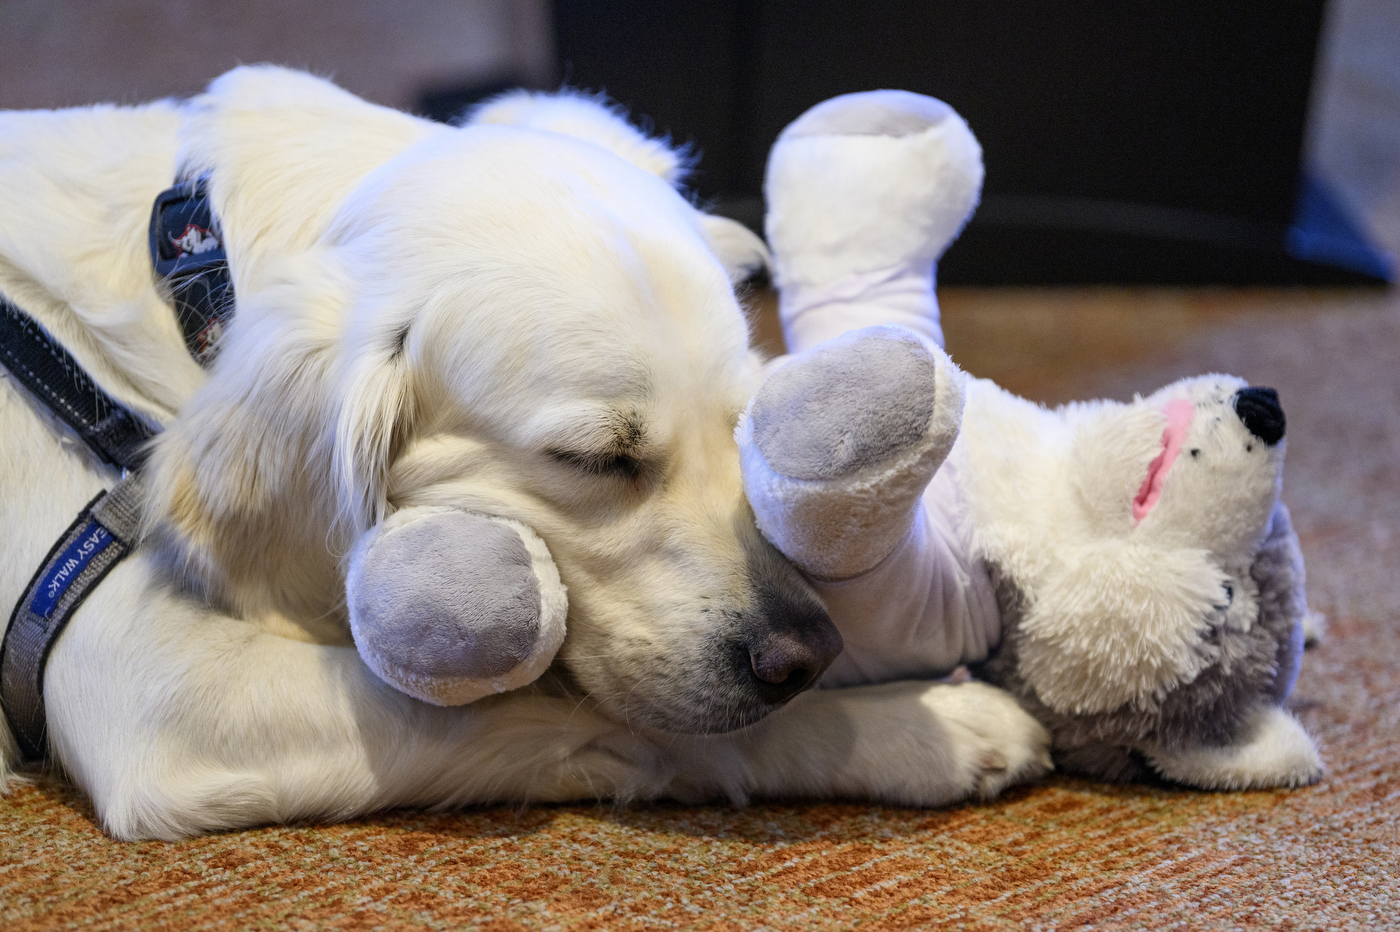 A white dog has a stuffed animal in its mouth. 